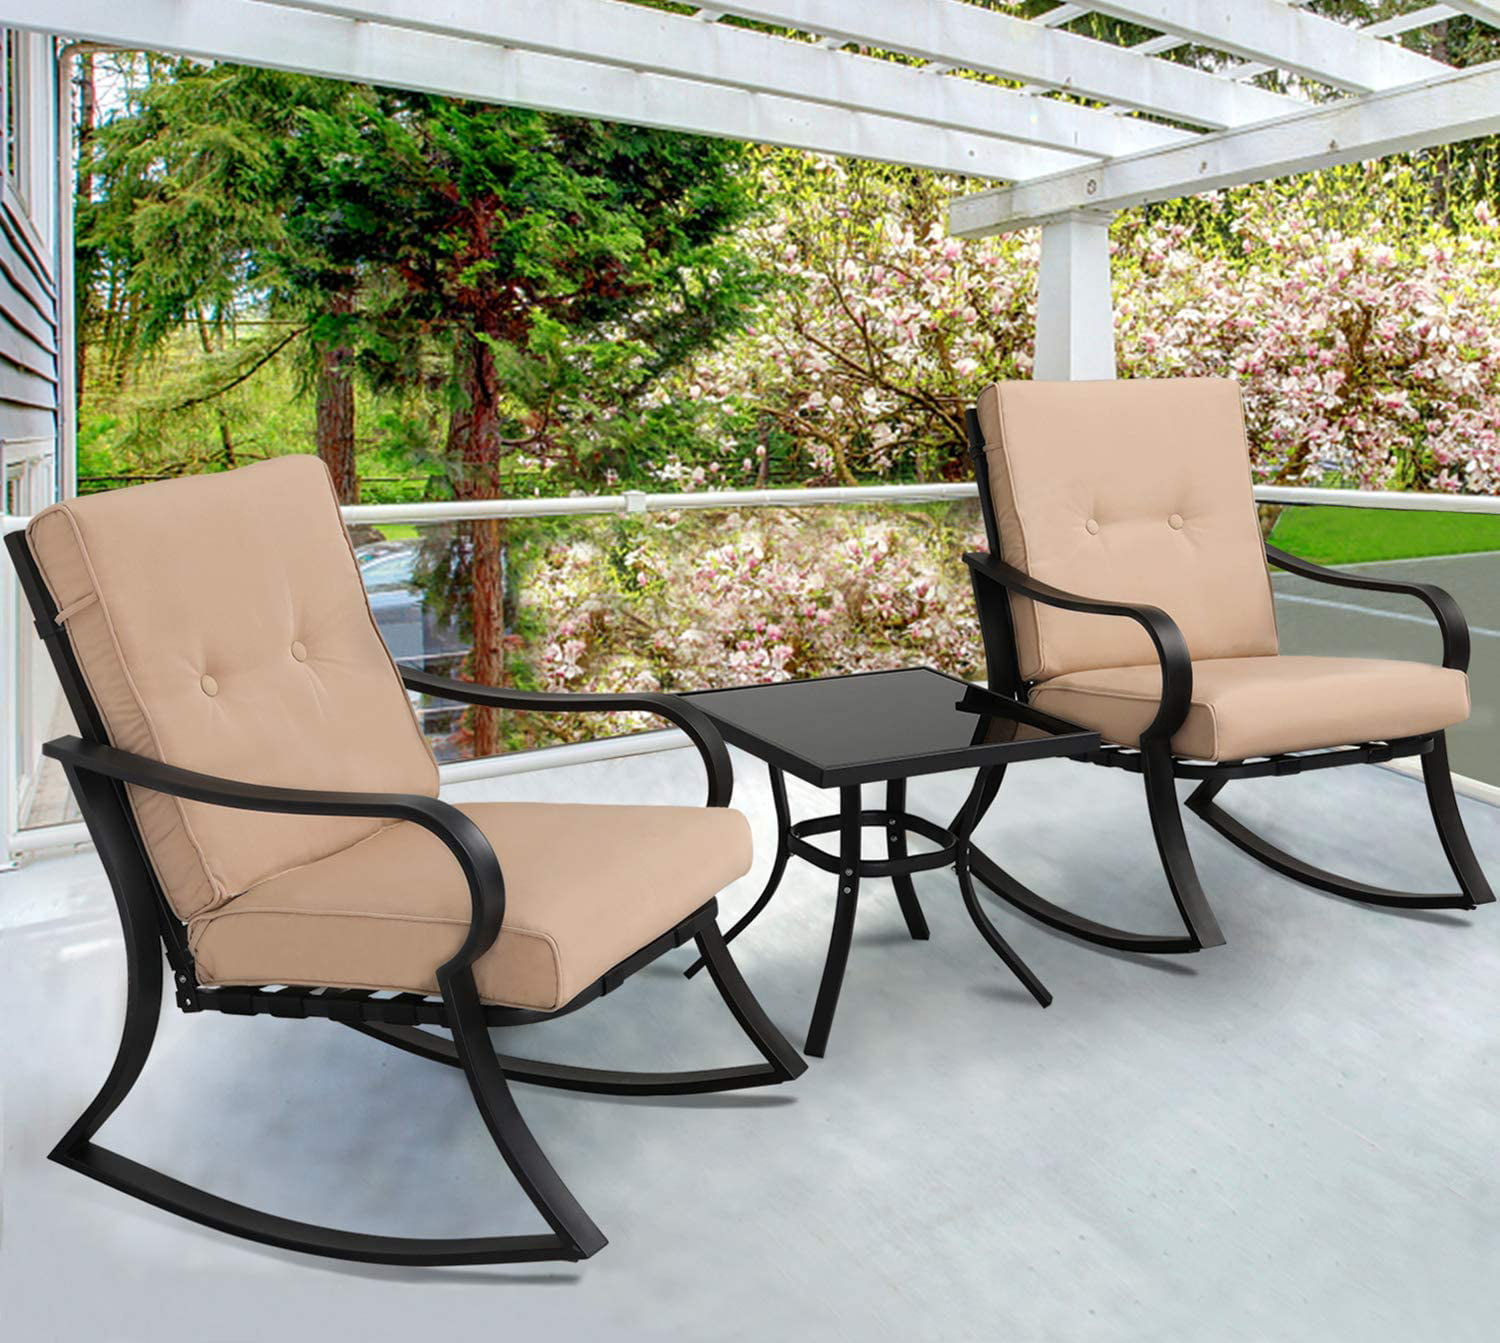 Outdoor Patio Table And Chairs Set